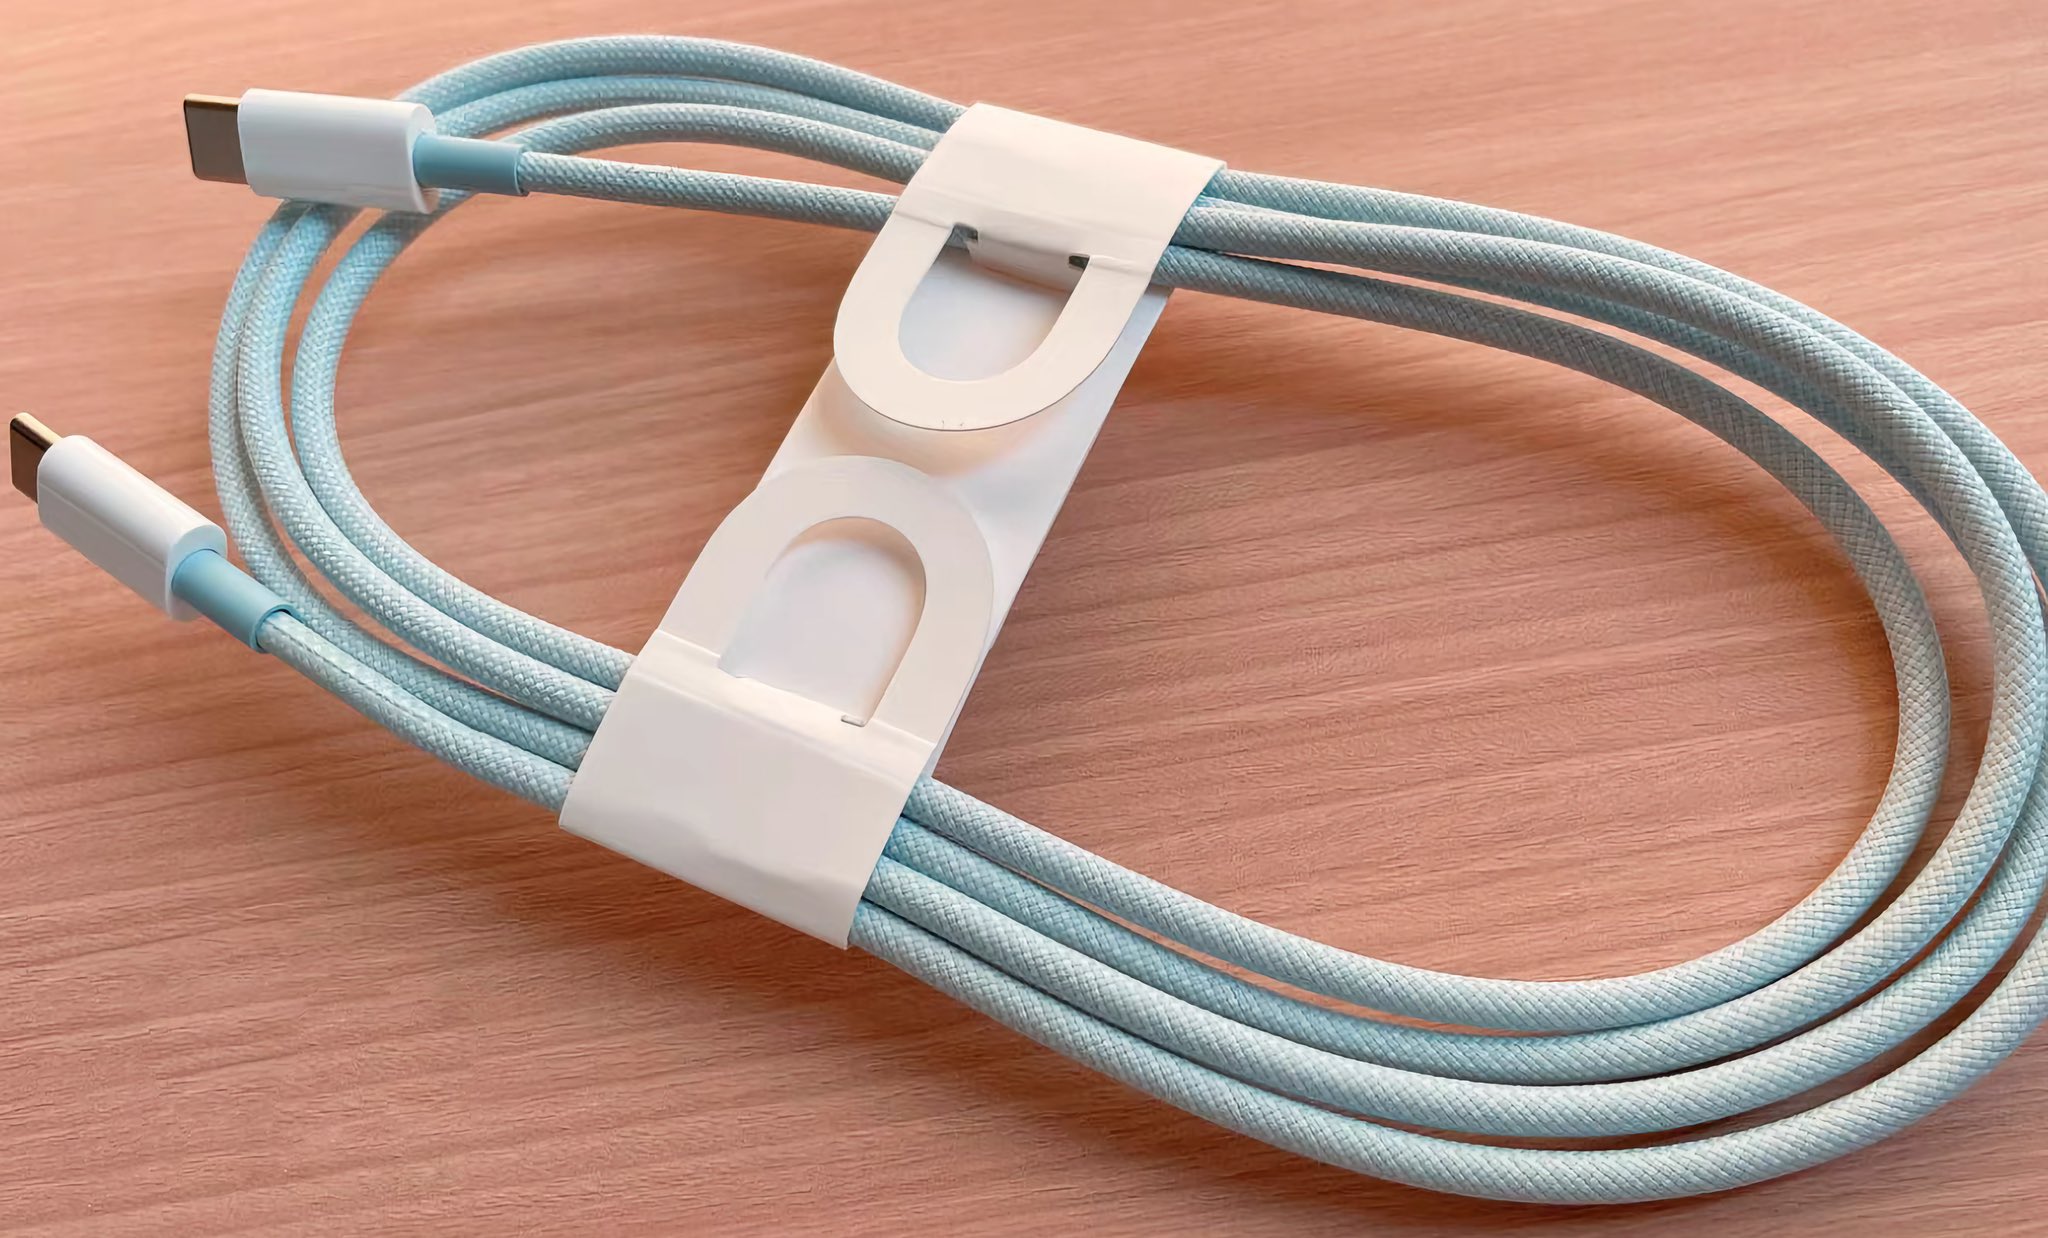 iPhone 15 USB-C Cables Again Said to Be Limited to USB 2.0 Transfer Speeds